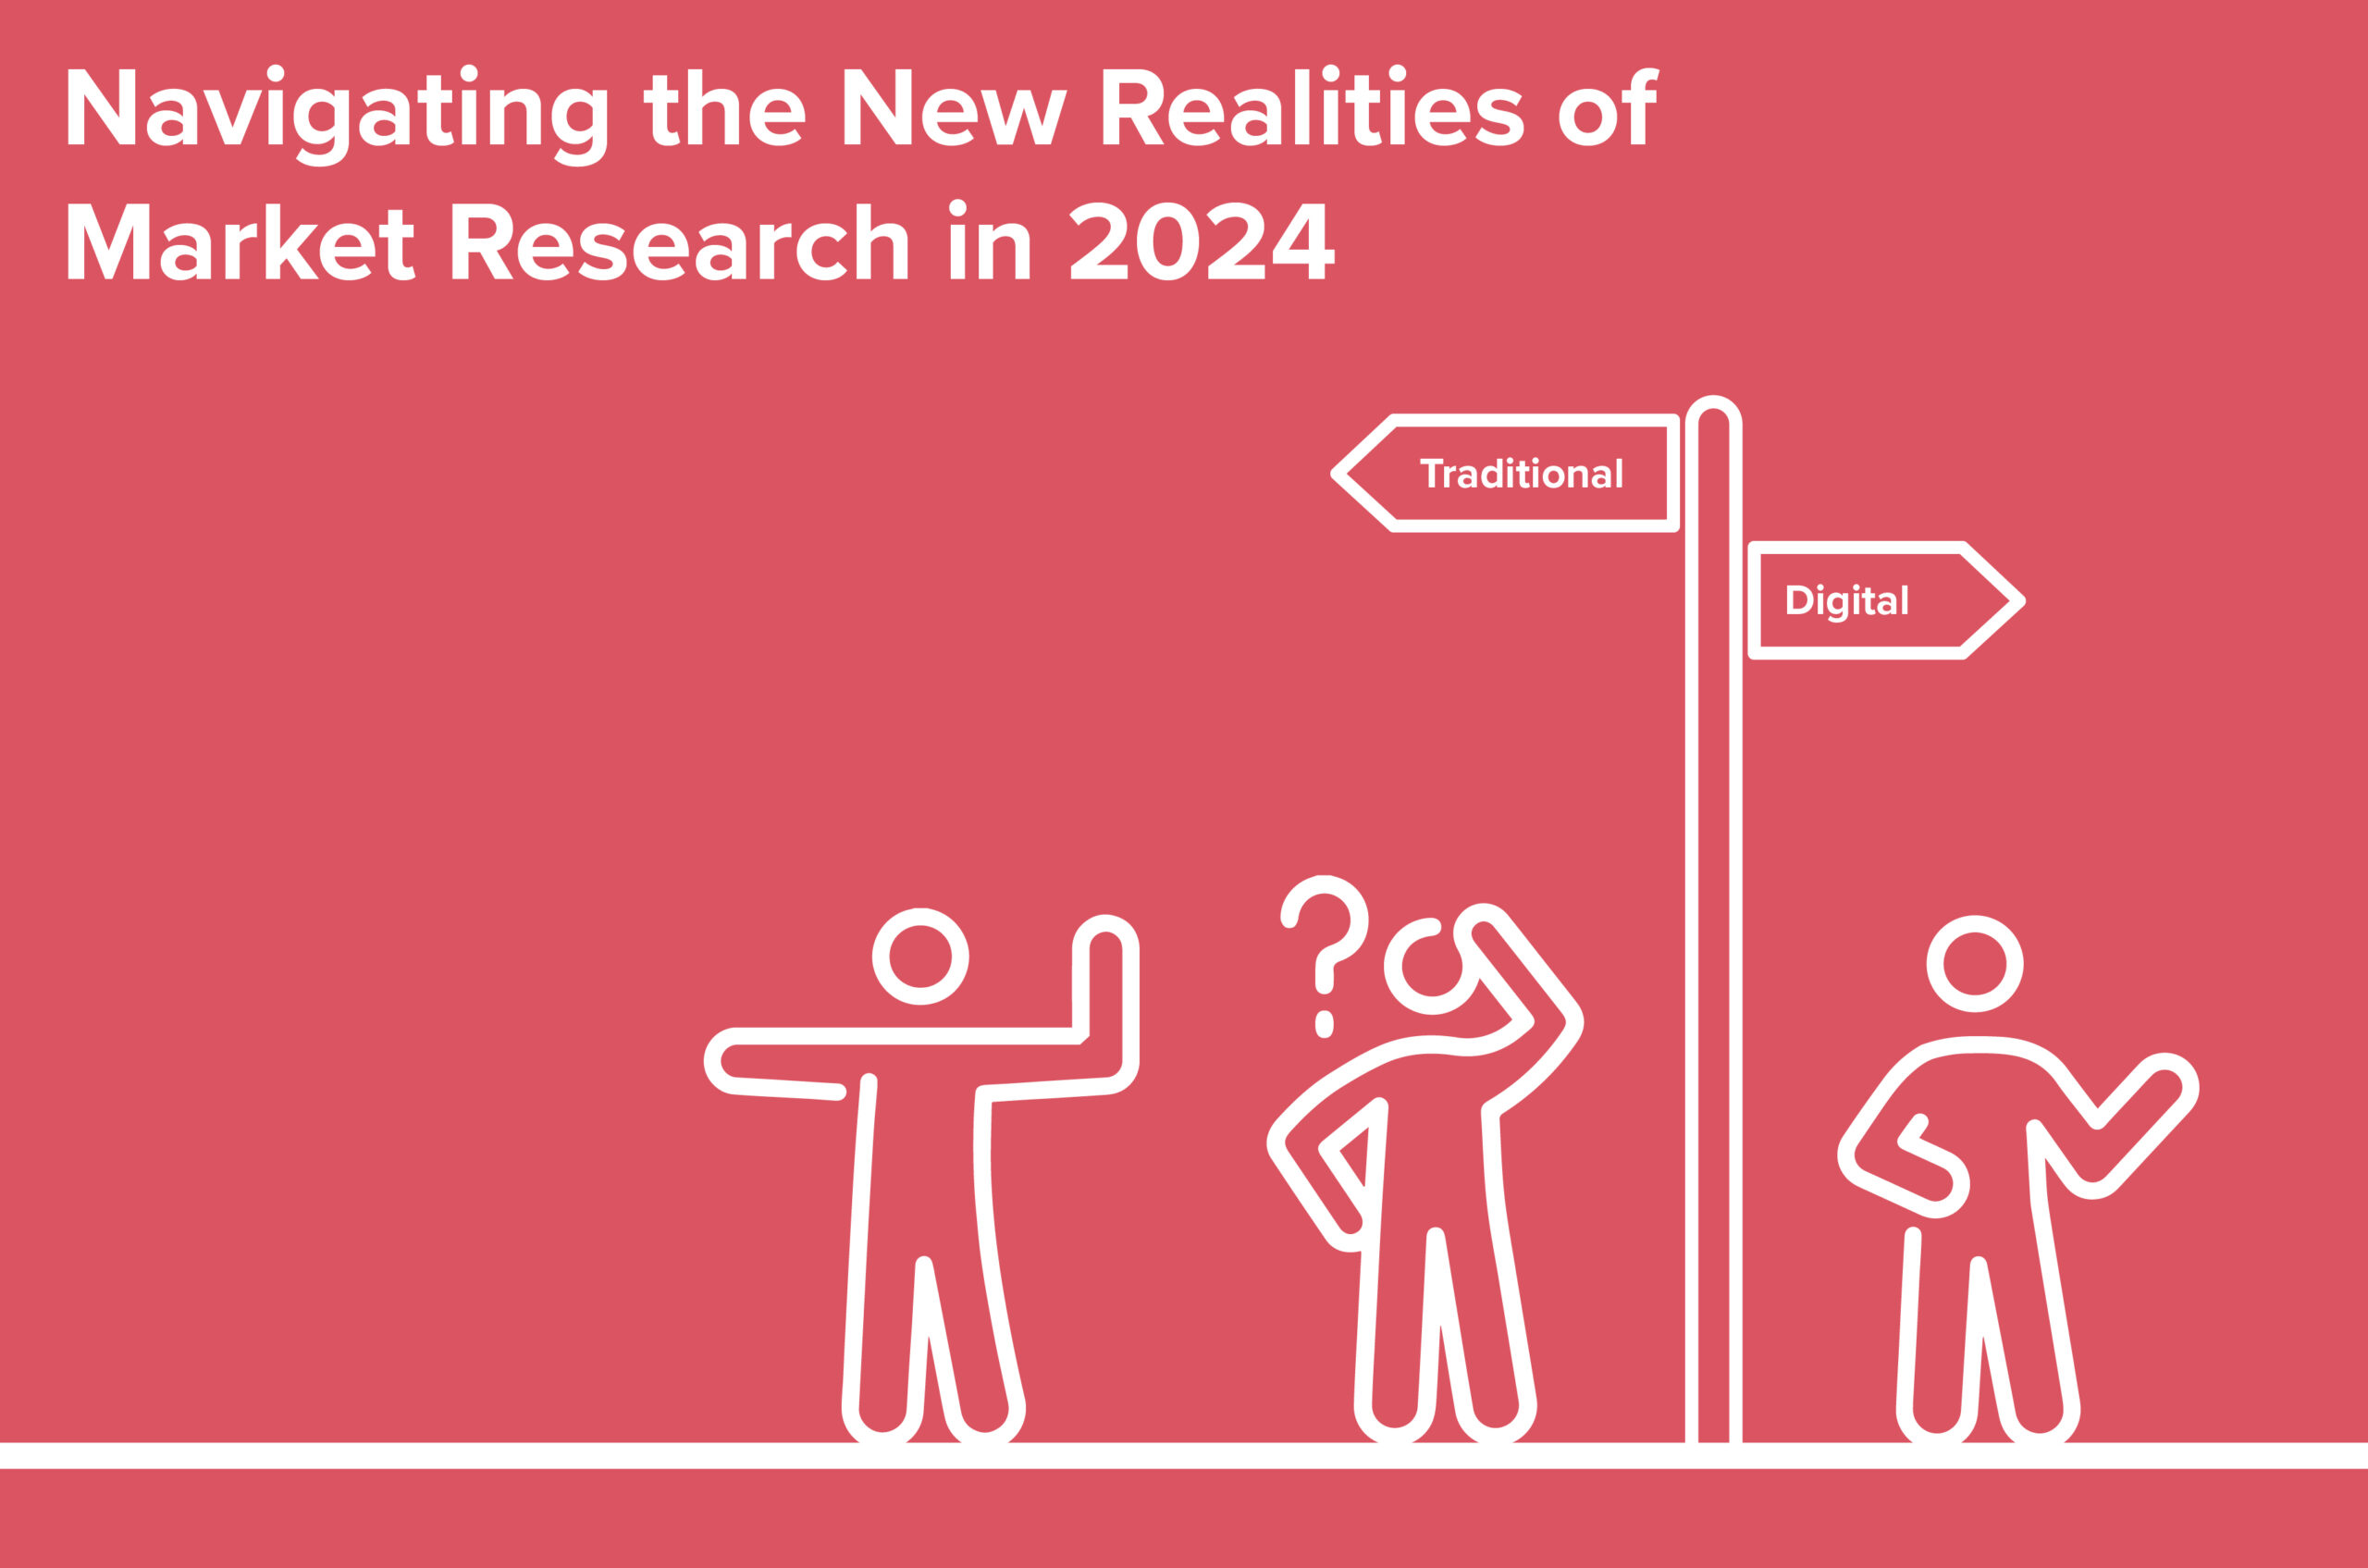 Navigating the New Realities of Market Research in 2024